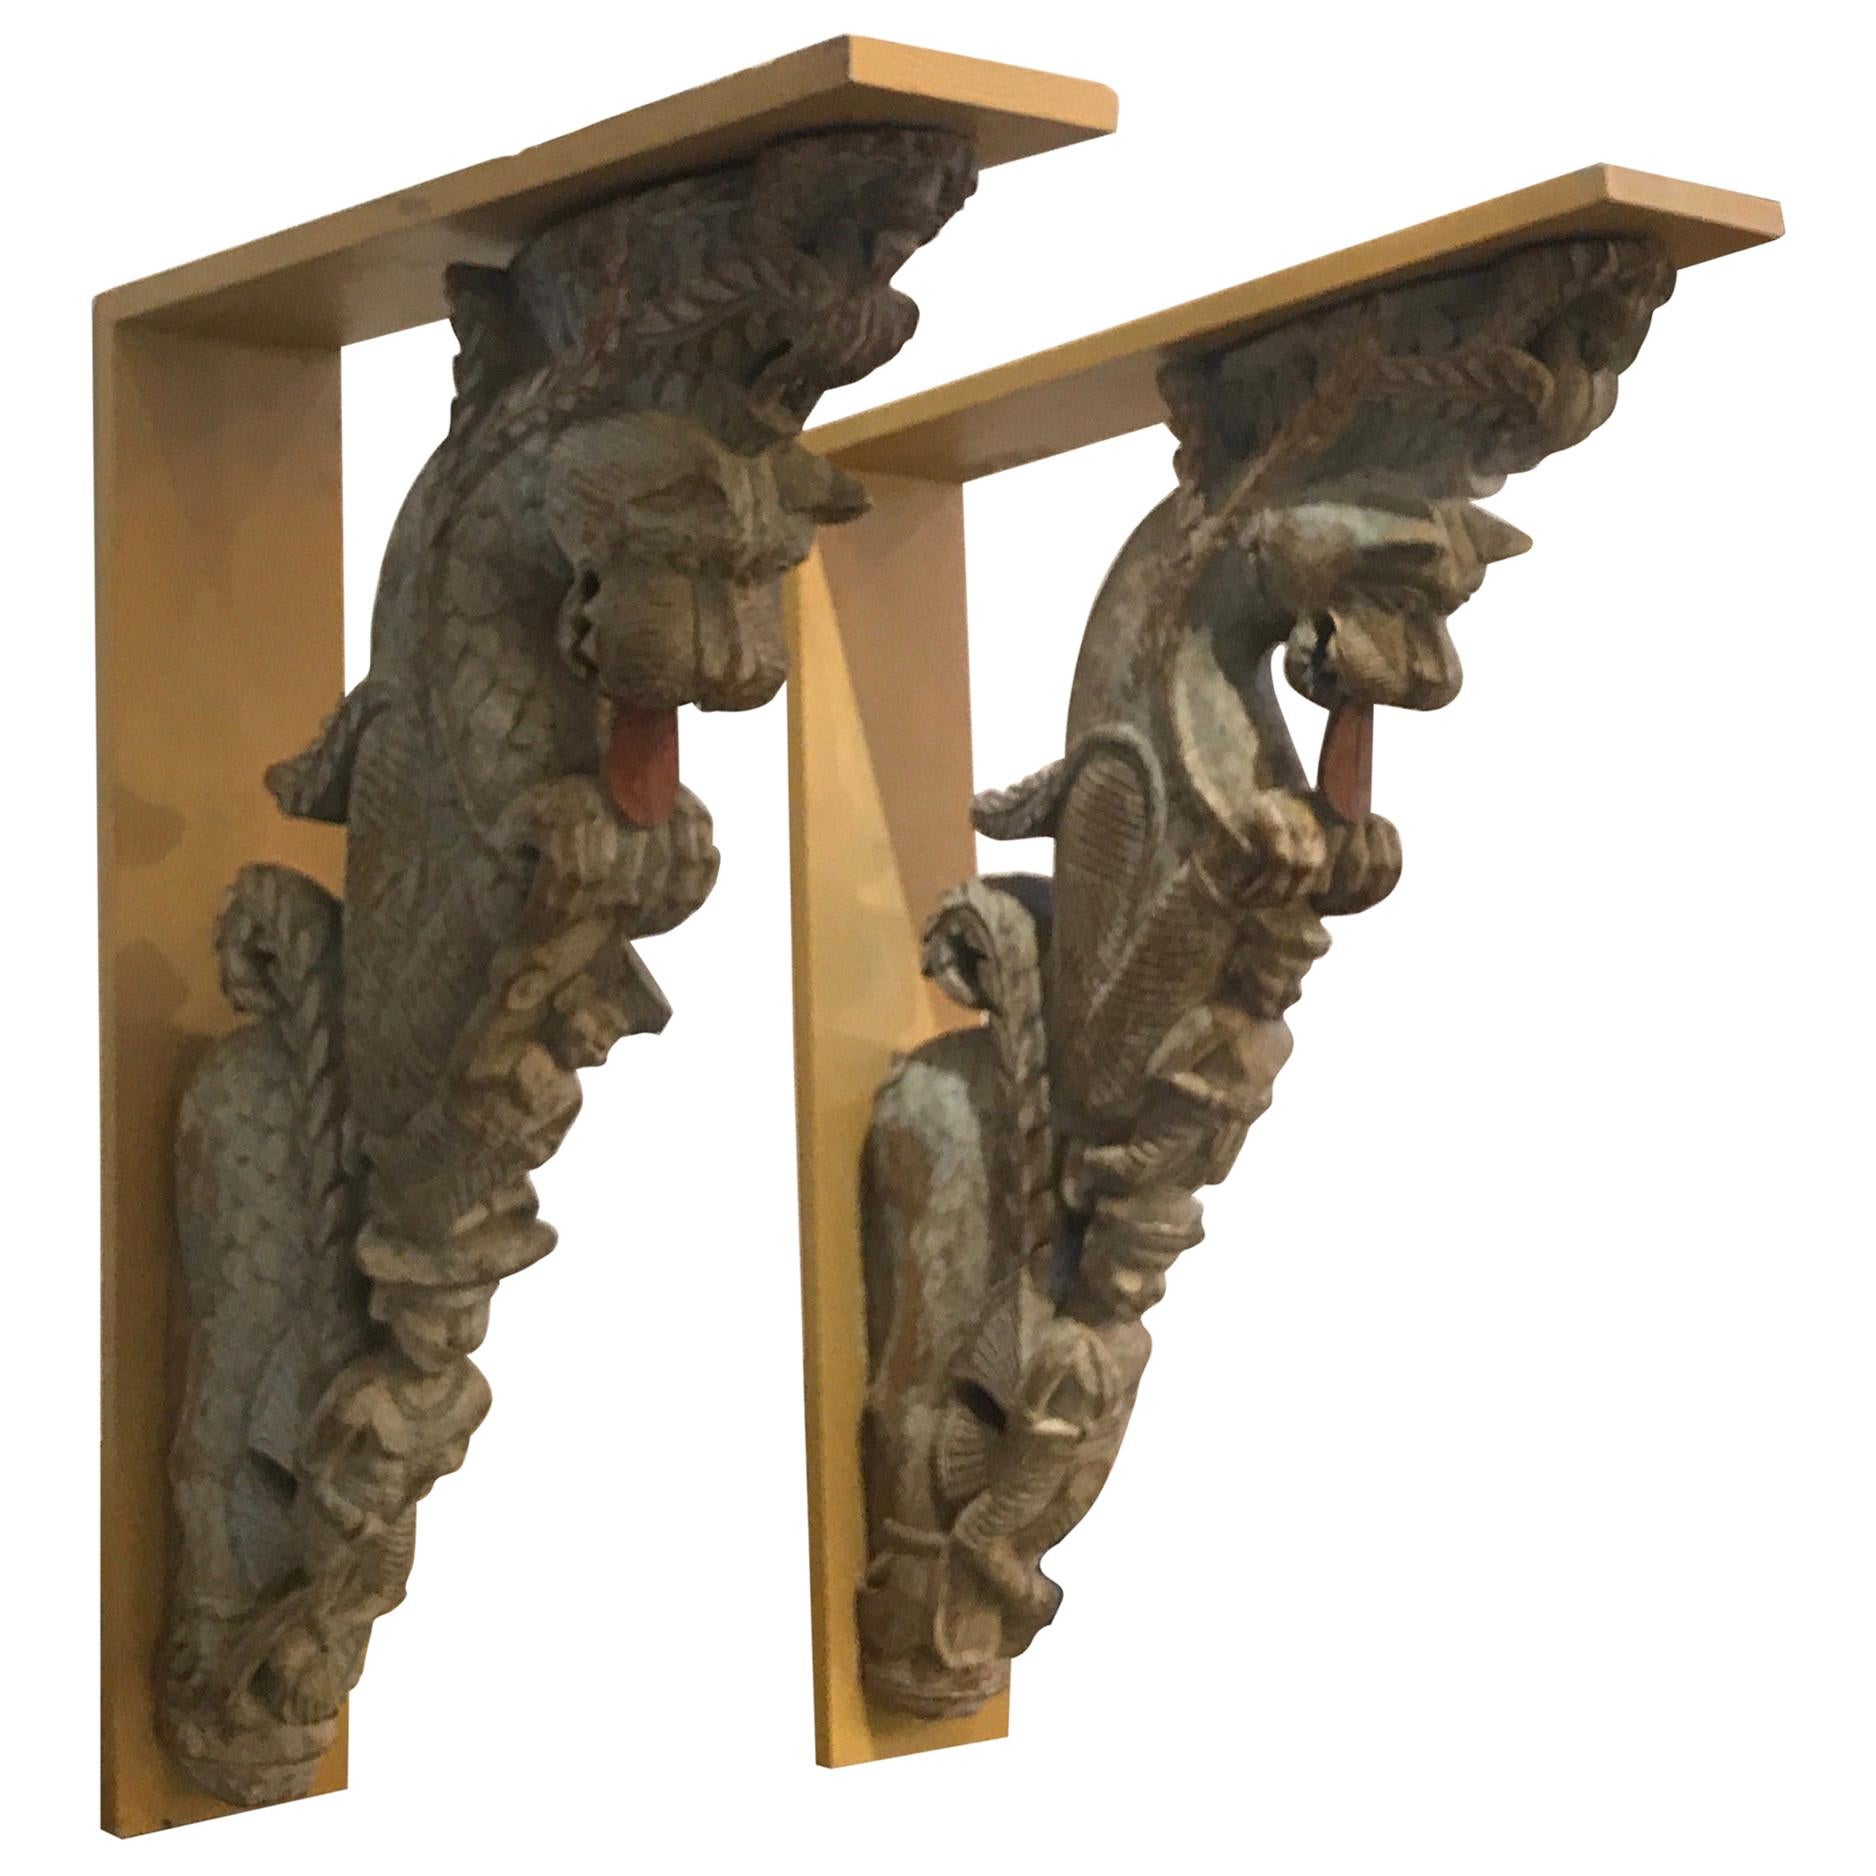 Pair of South East Asian Architectural Carvings Late 19th Century